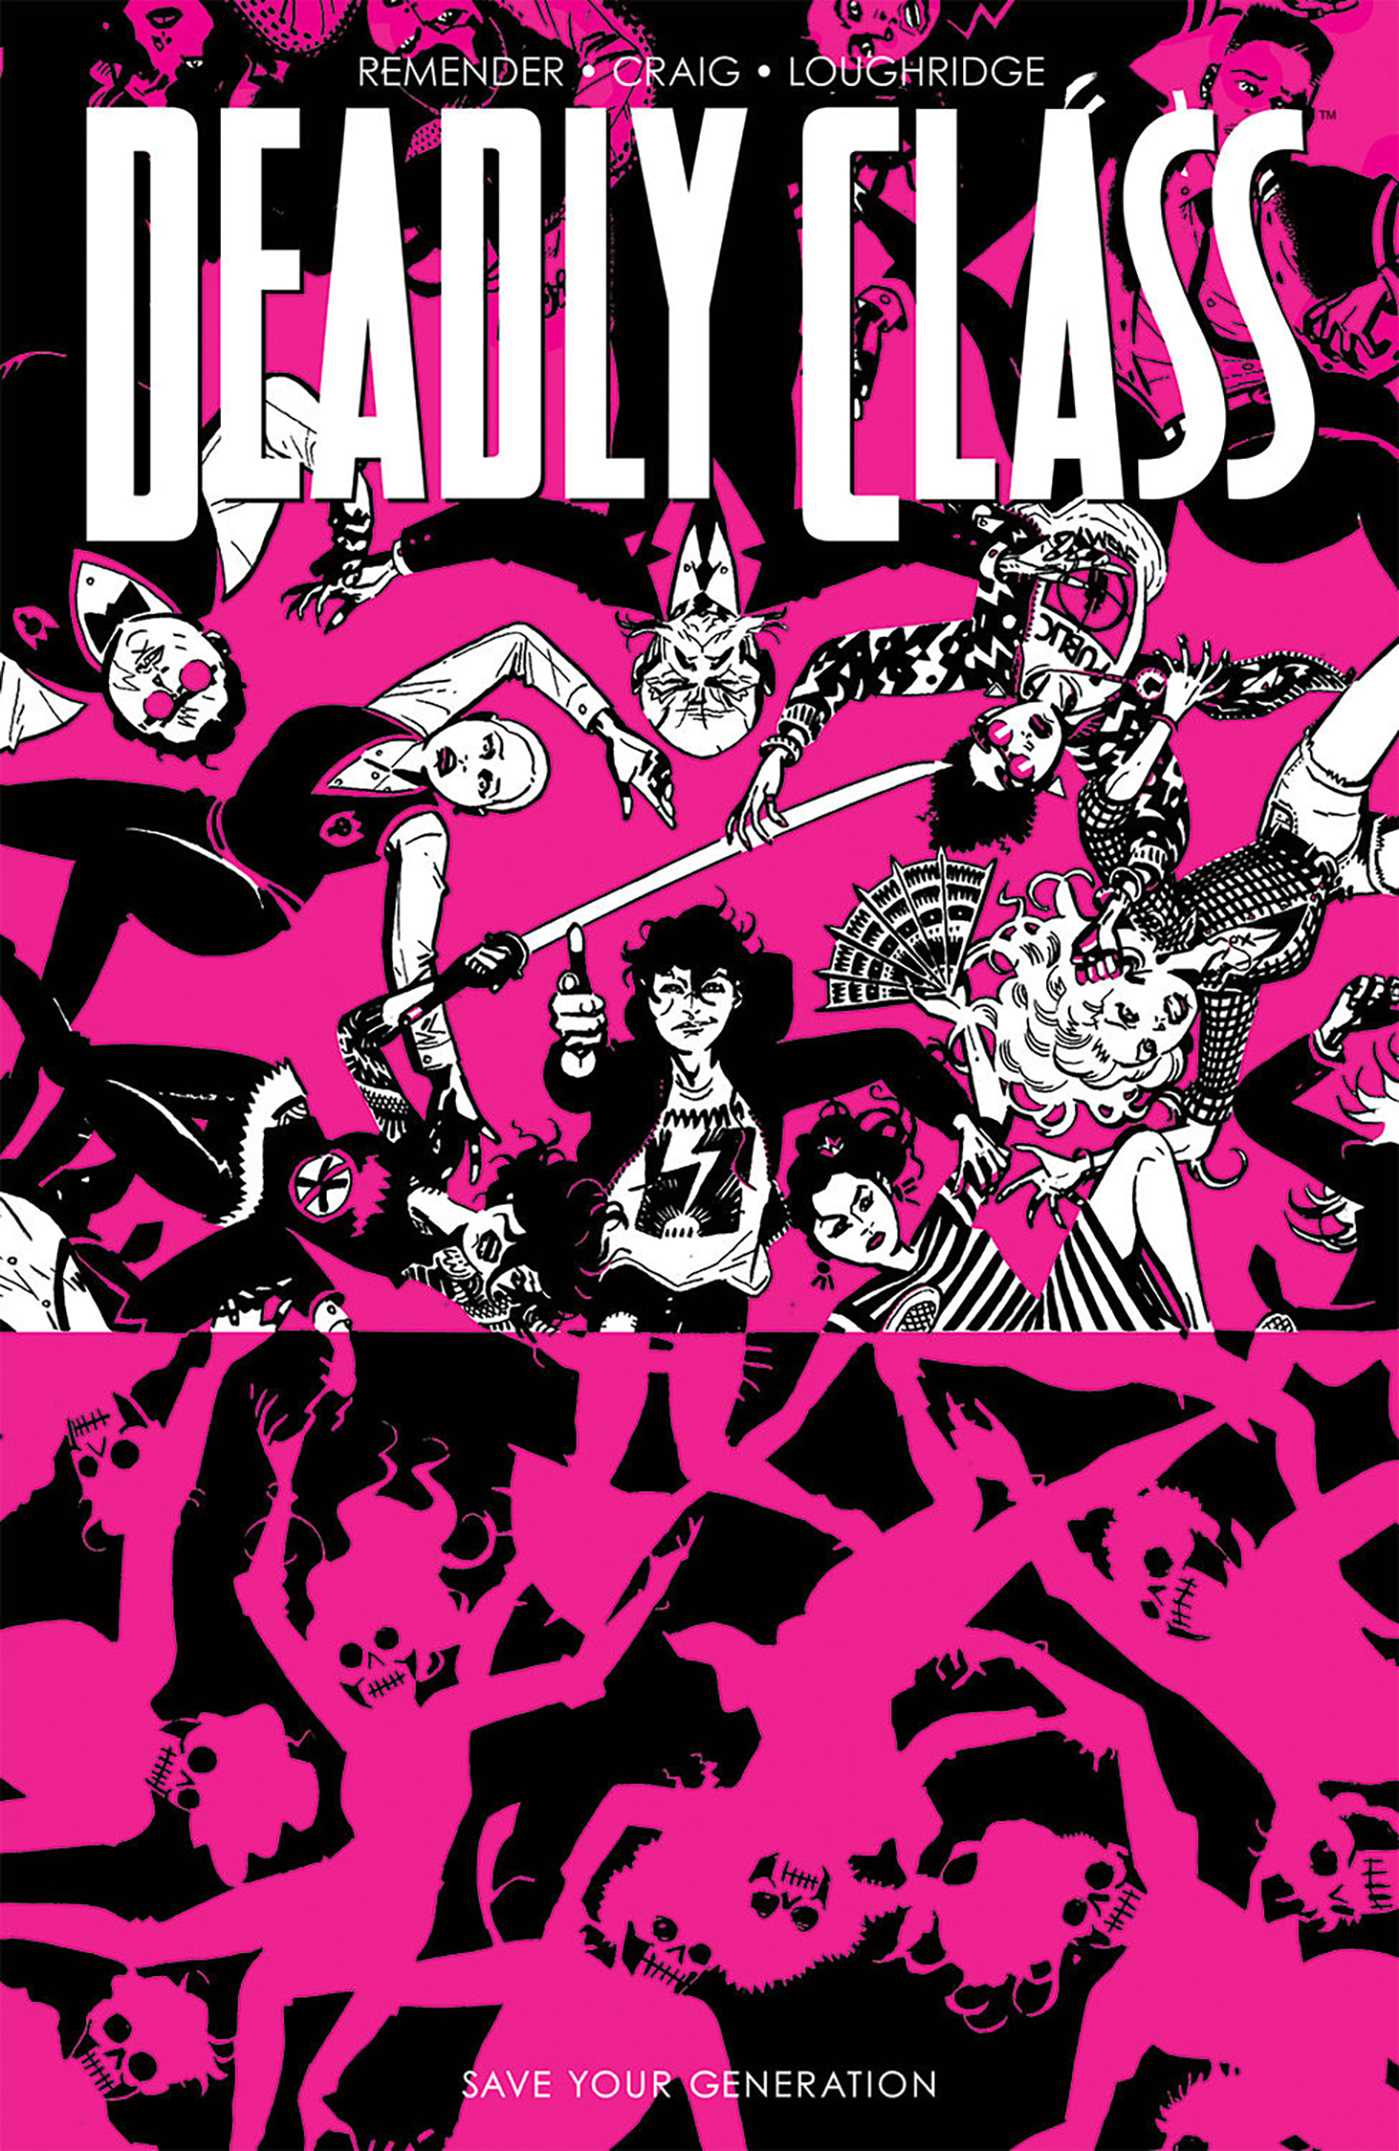 Deadly Class #1 to #35 by Rick Remender – Review